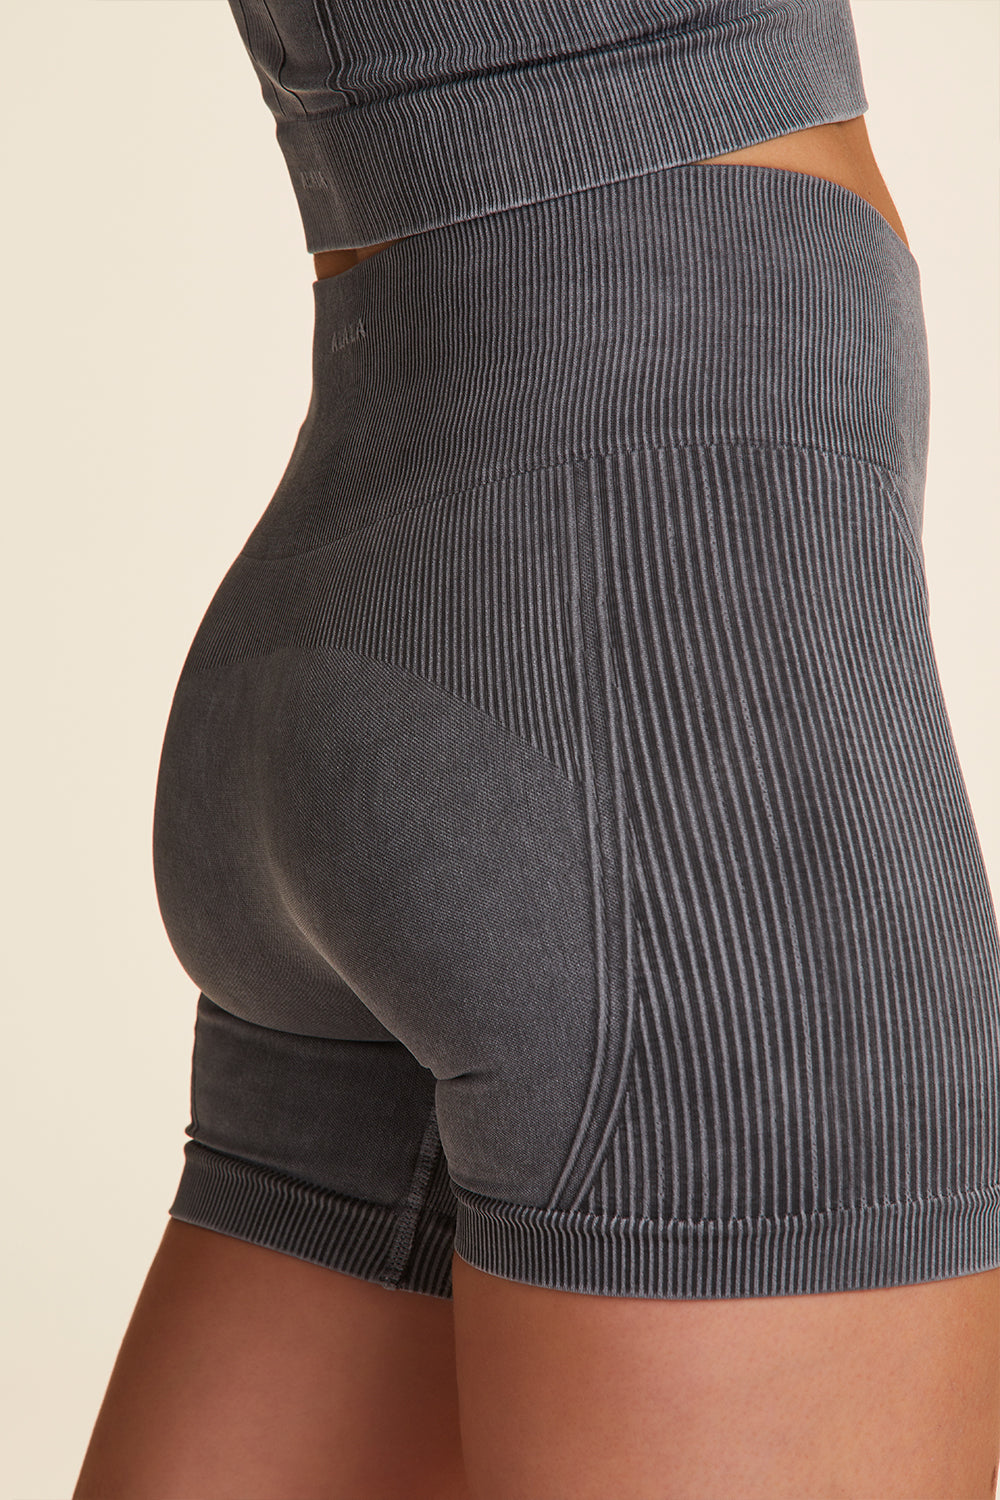 Zoomed in view of Alala Luxury Women's Athleisure barre seamless short in grey with signature Alala detail on back hem